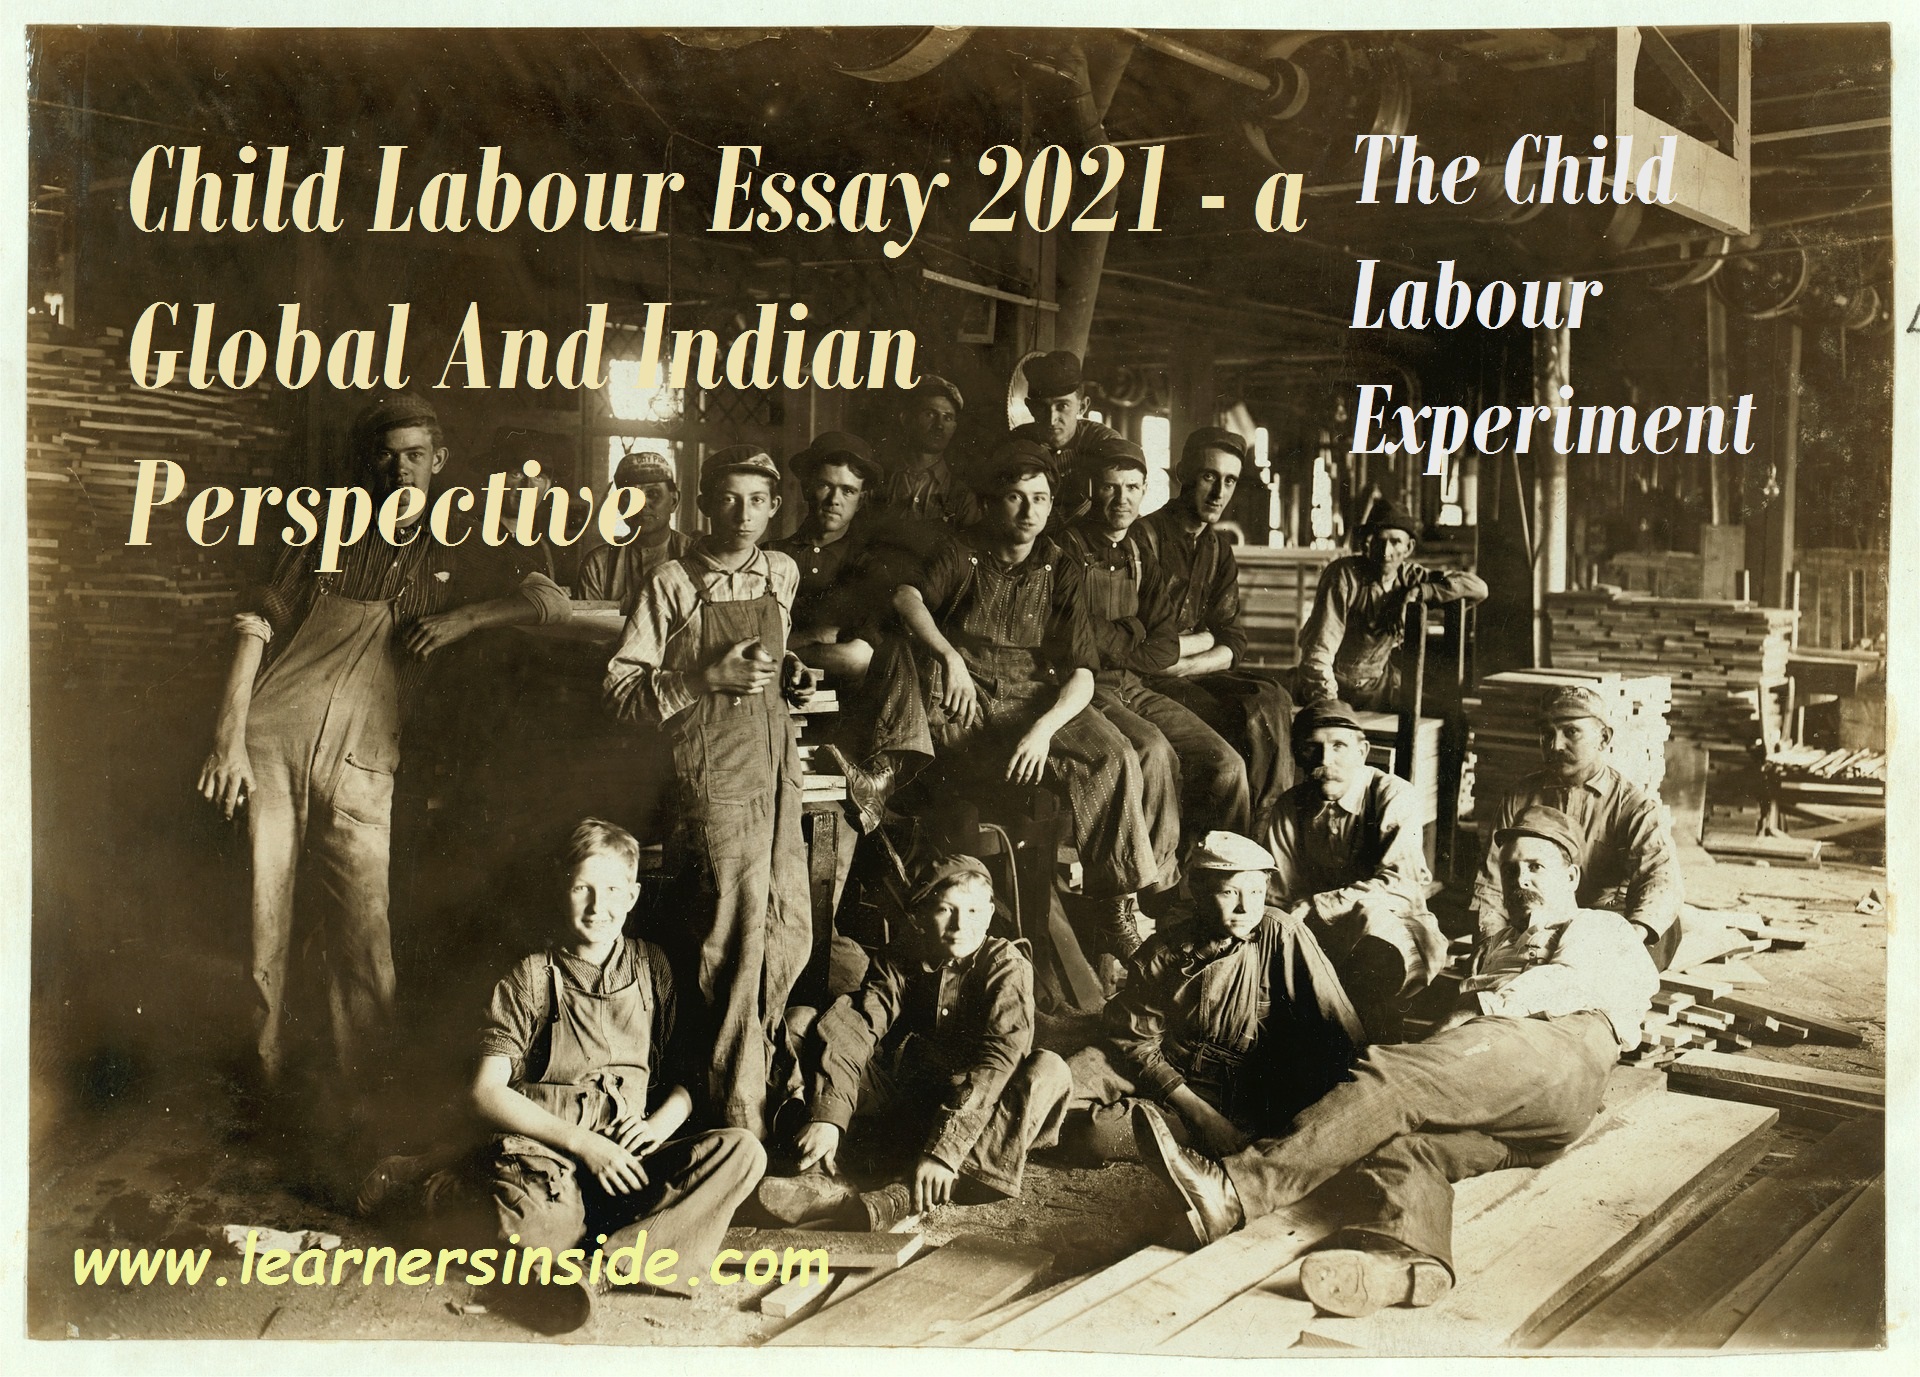 Child Labour Essay 2021 - a Global And Indian Perspective